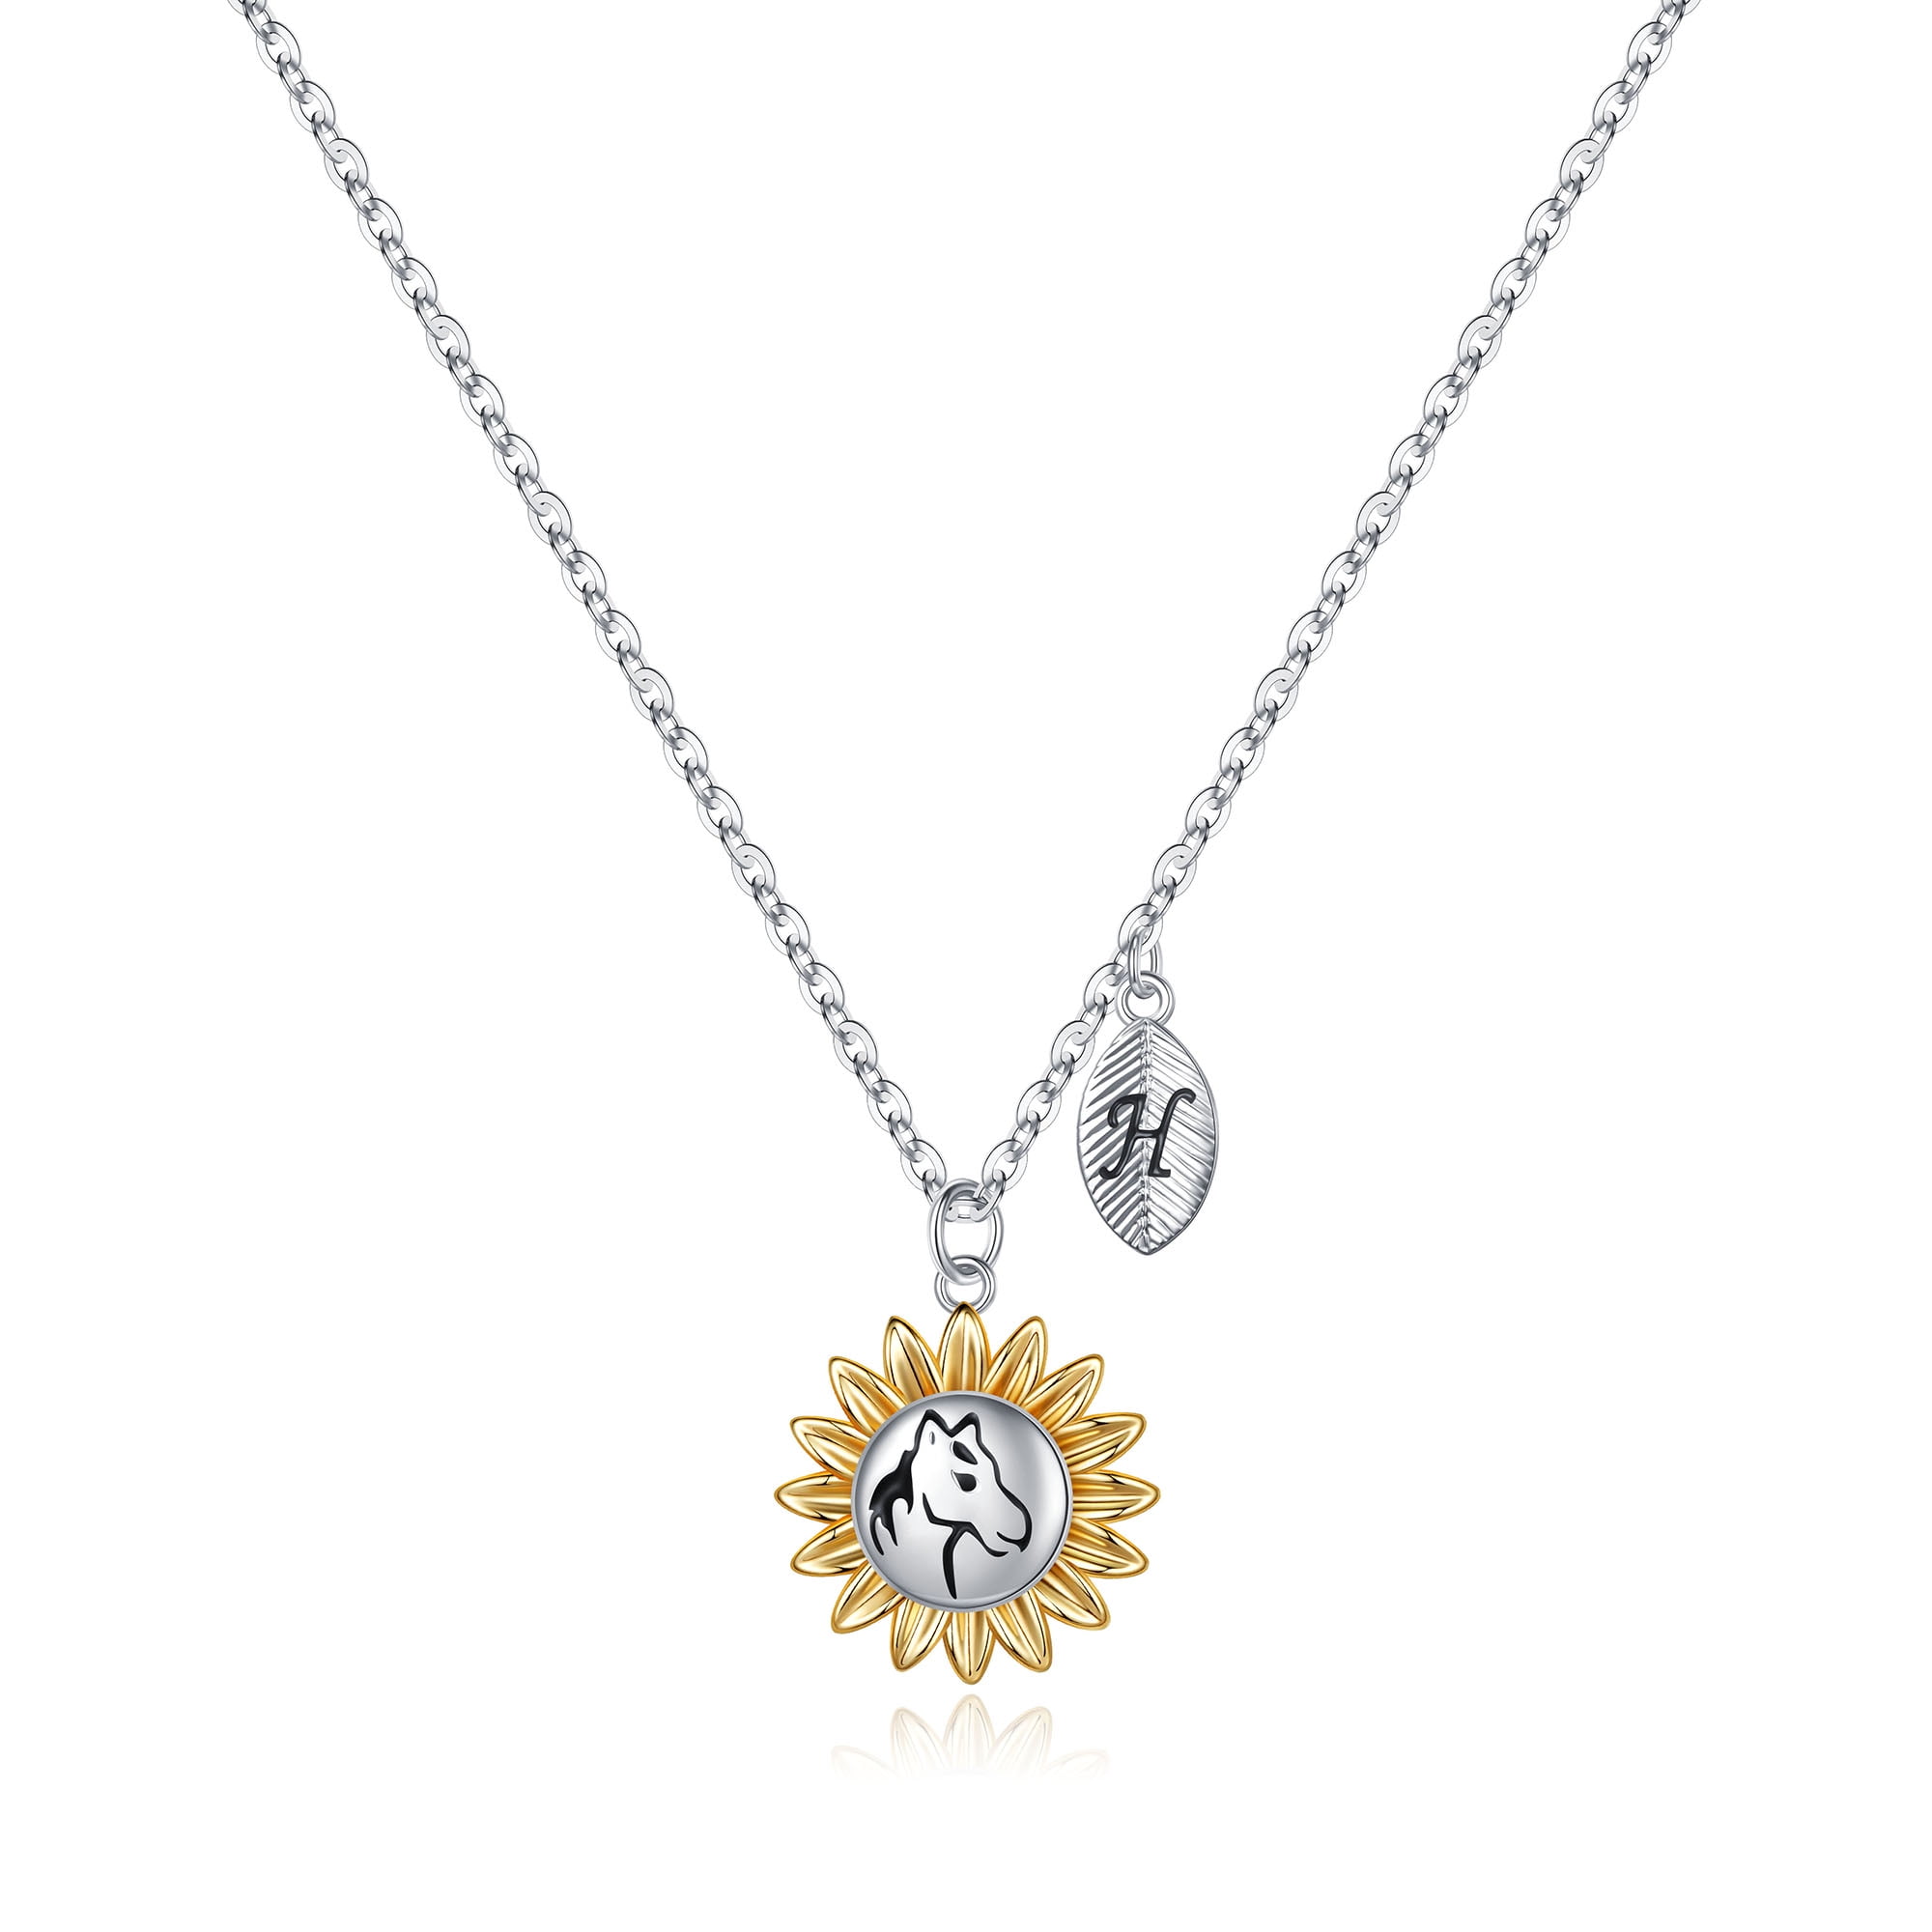 Jewels Obsession Over 65 And Loving It Necklace 14K Rose Gold-plated 925 Silver Over 65 & Loving It Pendant with 18 Necklace